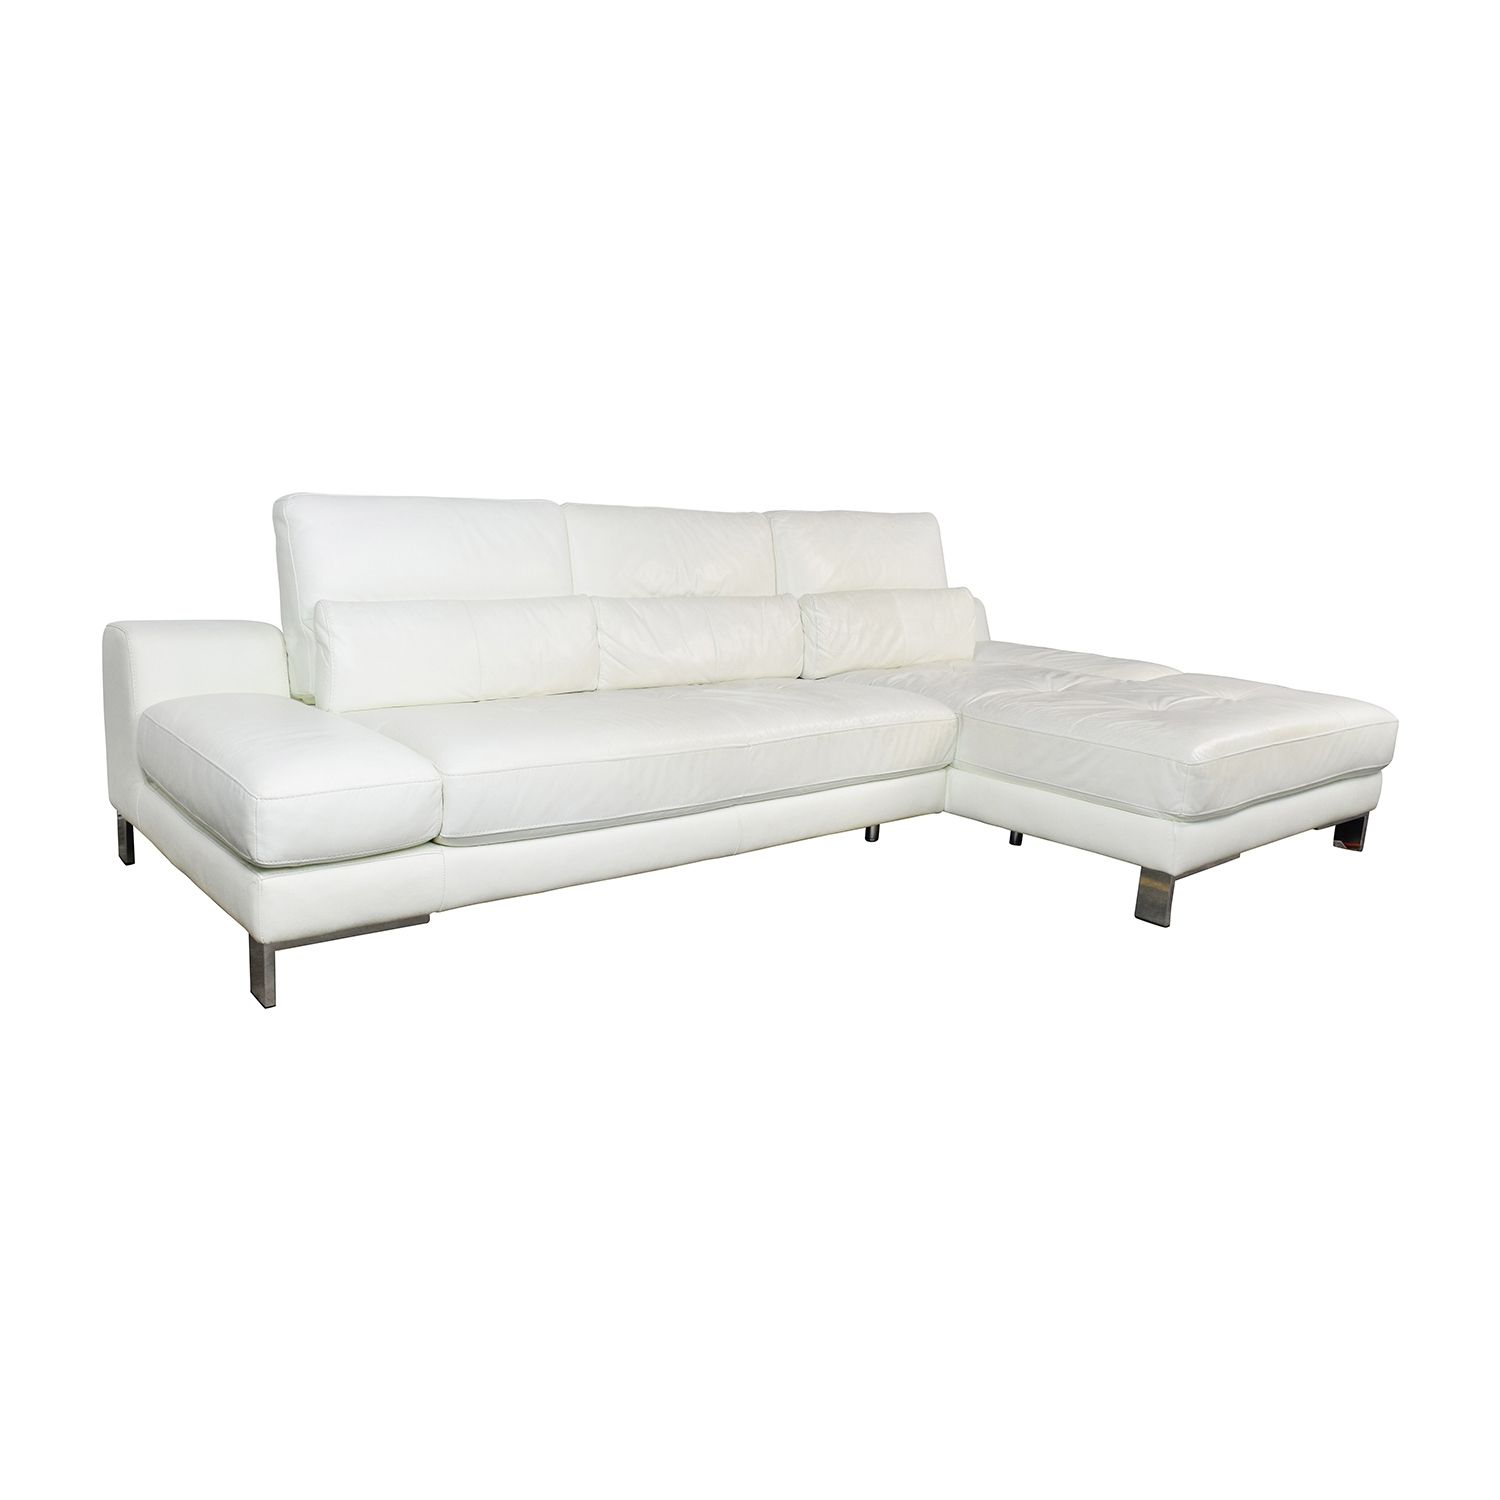 72% Off – Mobilia Canada Mobilia Canada Funktion White Leather Throughout Mobilia Sectional Sofas (View 4 of 10)